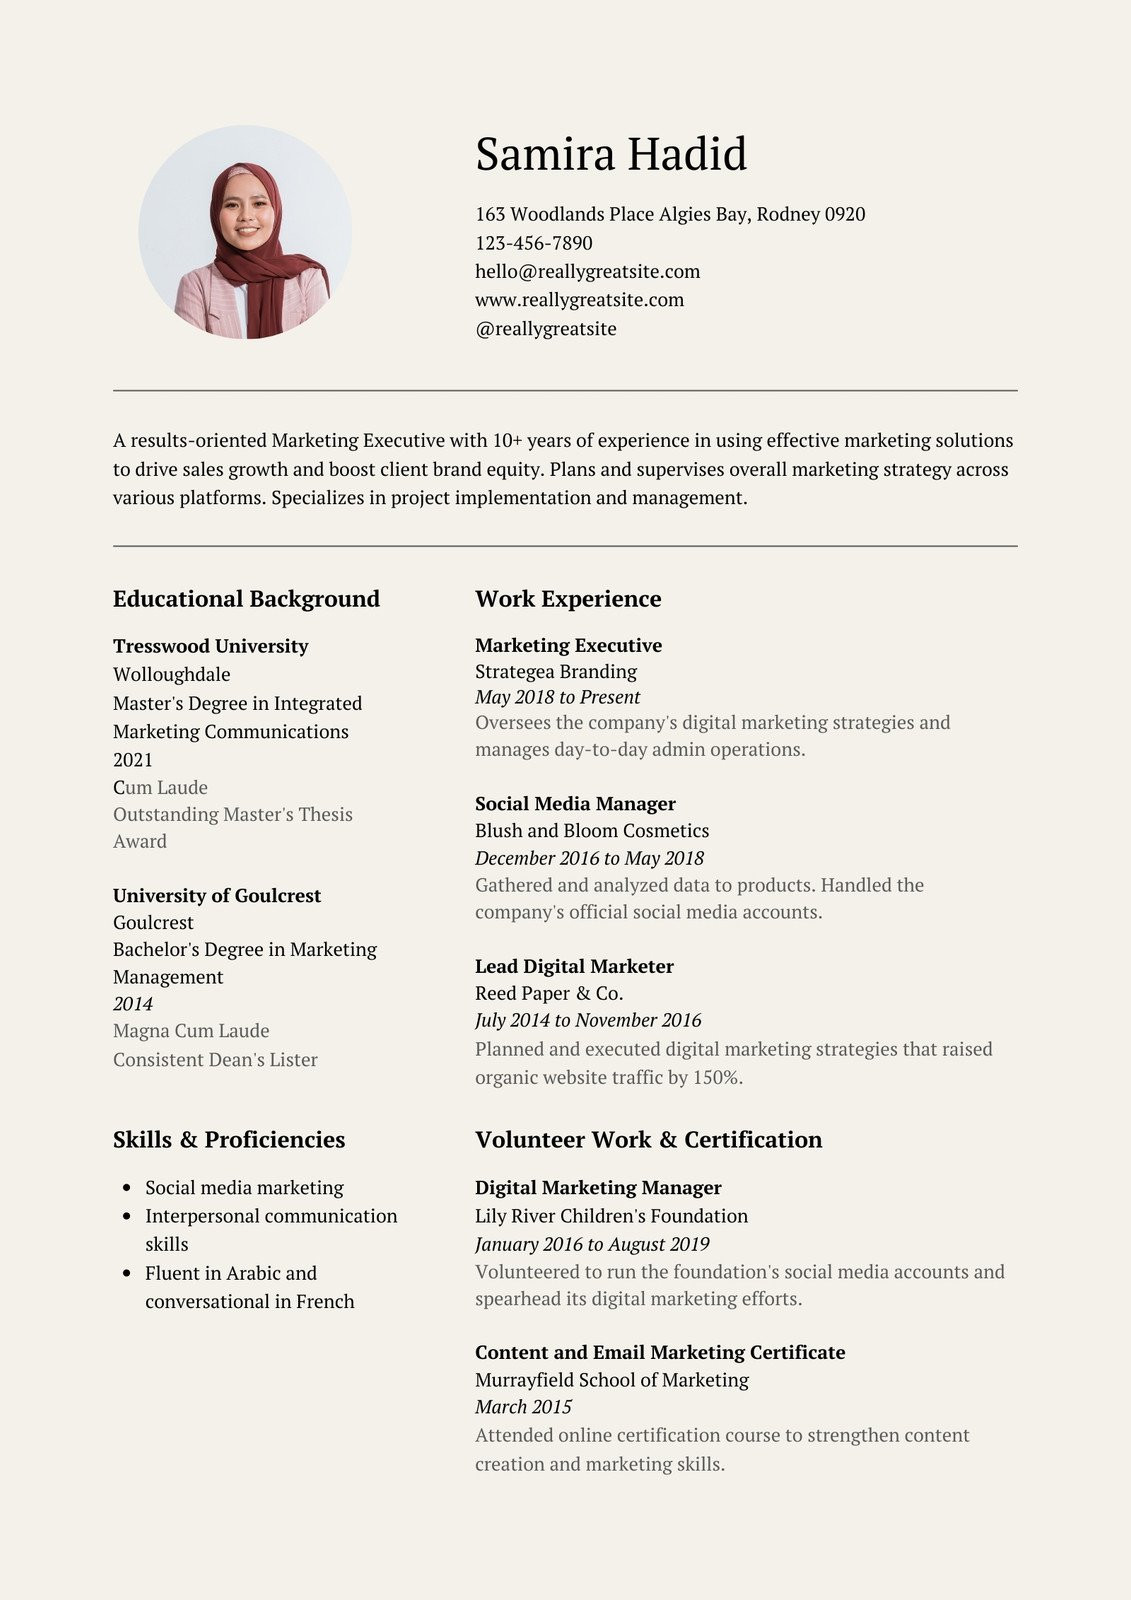 Sample Of Resume Of Promotional Products with Logo Specialist Free, Printable, Customizable Photo Resume Templates Canva